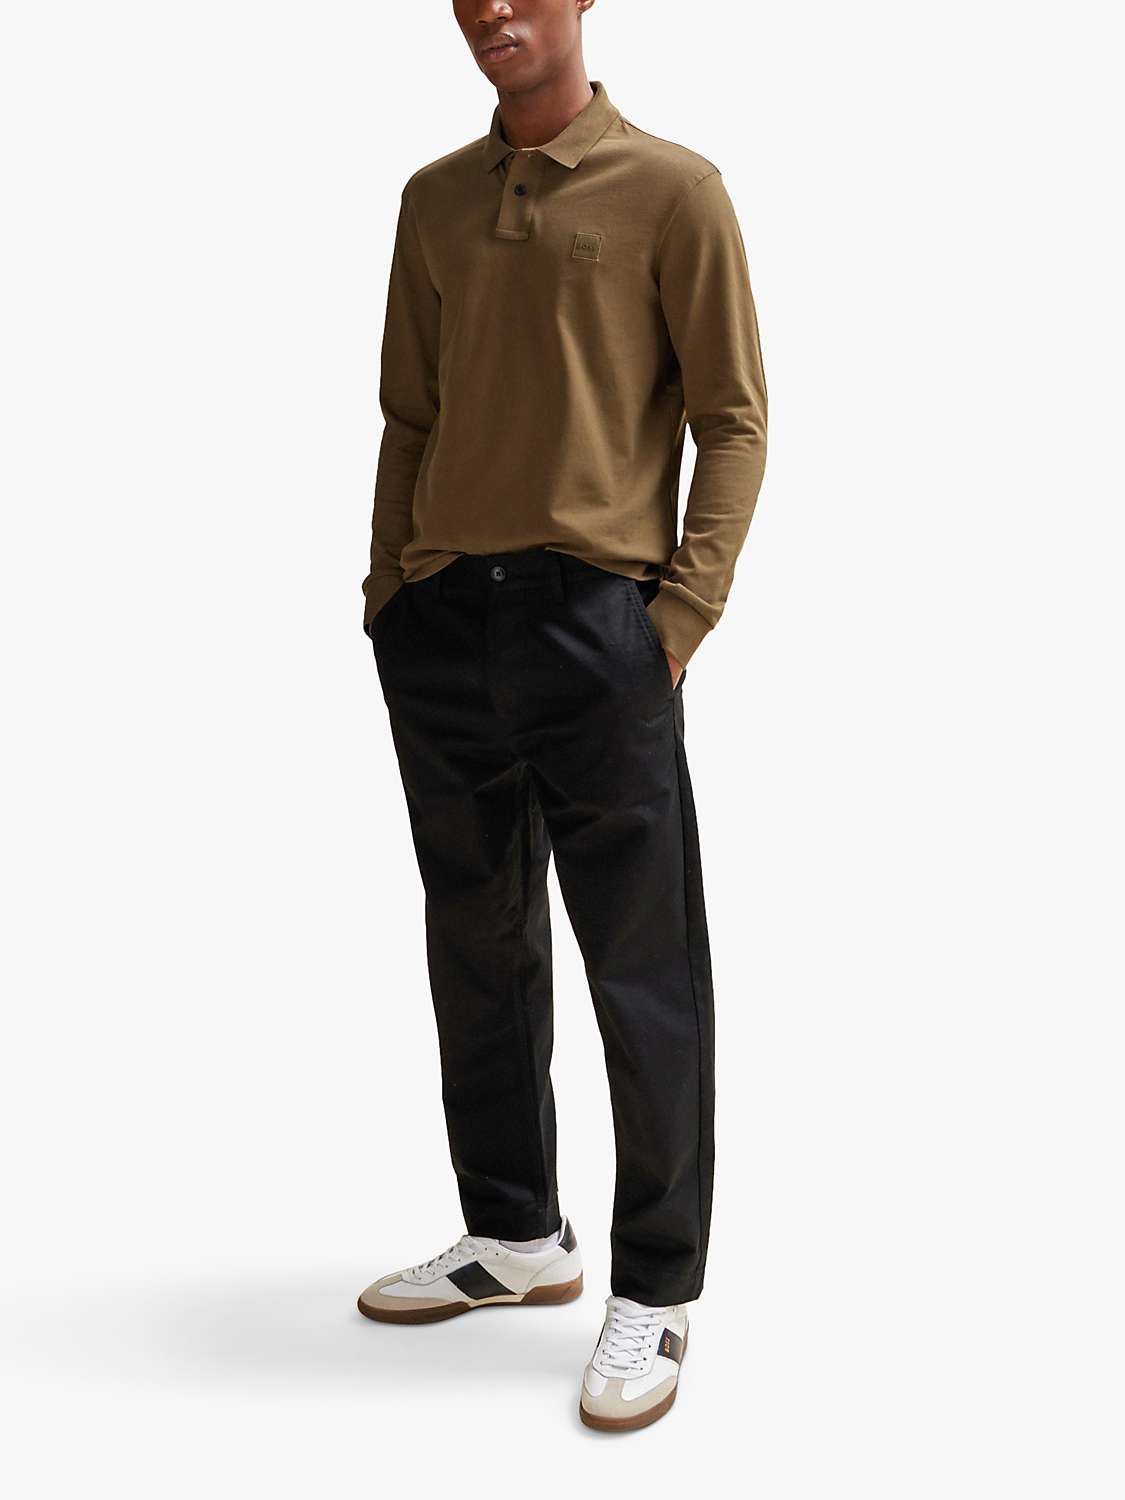 Buy BOSS Passerby 368 Long Sleeve Polo Shirt, Green Online at johnlewis.com